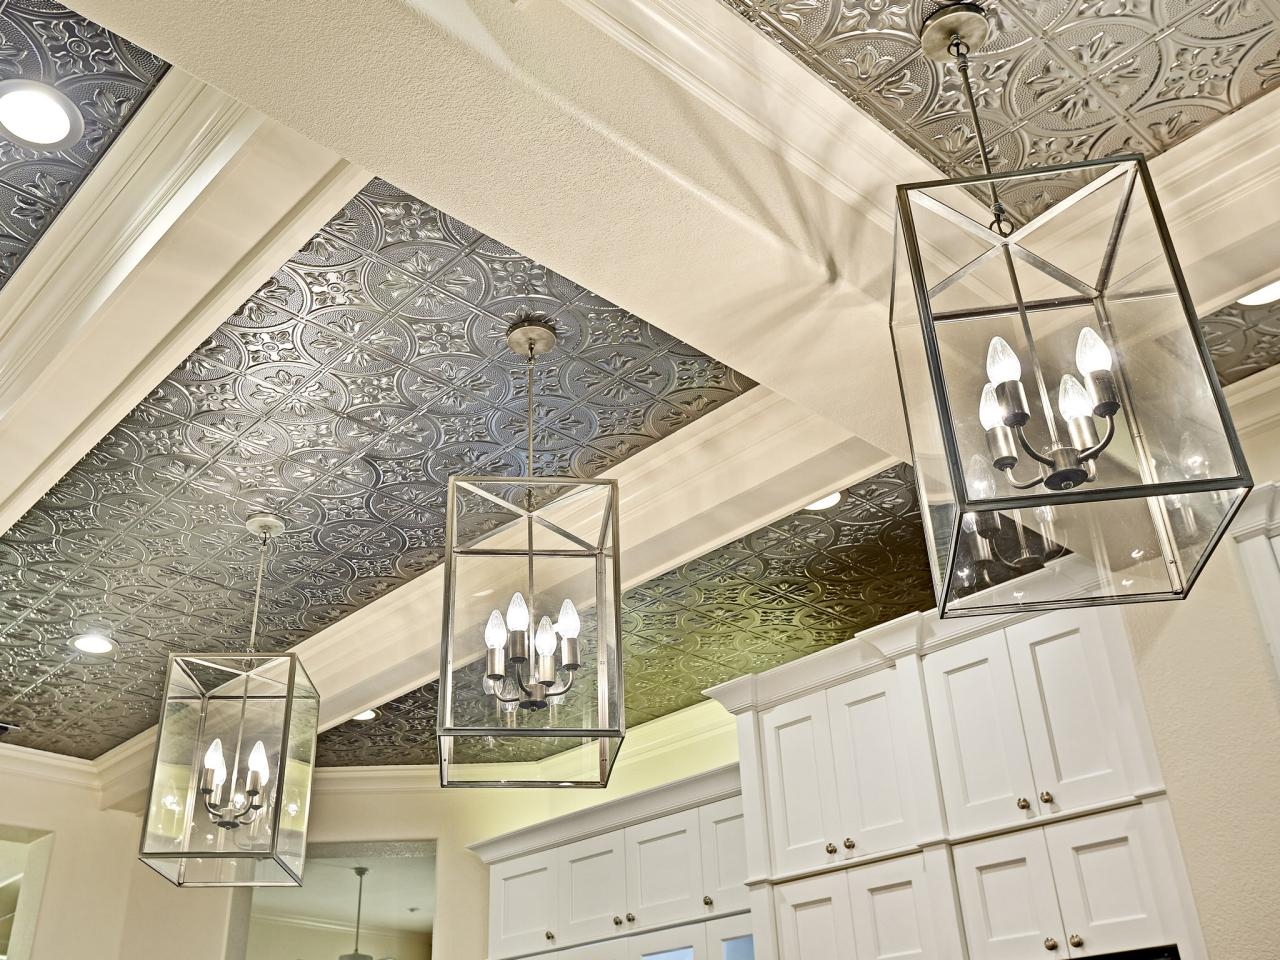 Metal Ceiling Tiles On Walls Metal Ceiling Tiles On Walls great ideas for upgrading your ceiling hgtvs decorating 1280 X 960